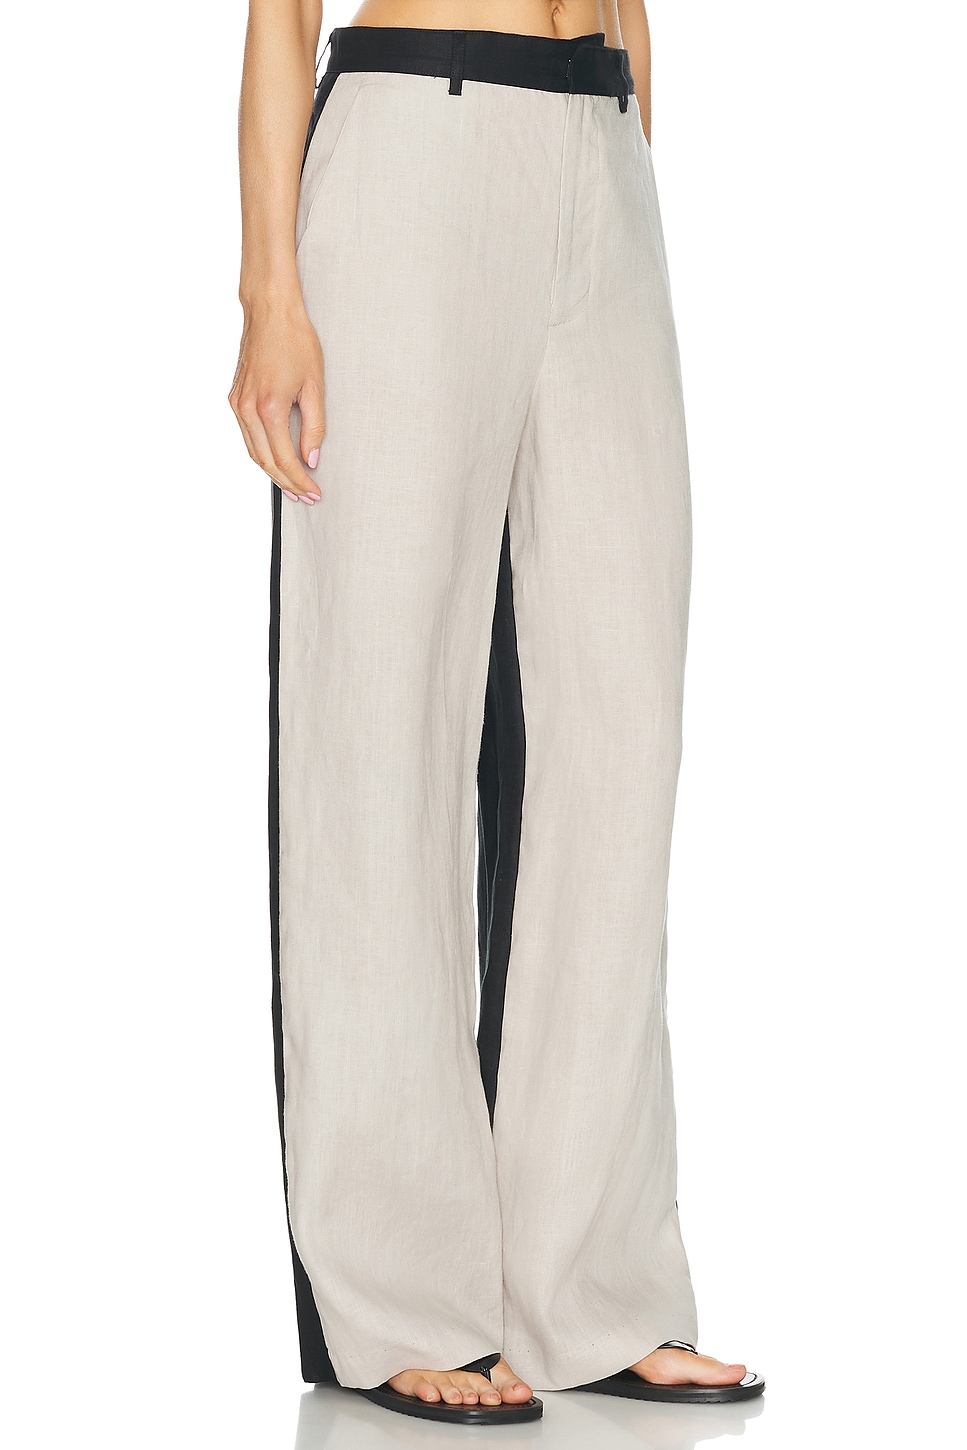 Image 1 of Enza Costa Linen Colorblock Trouser in Flax & Black